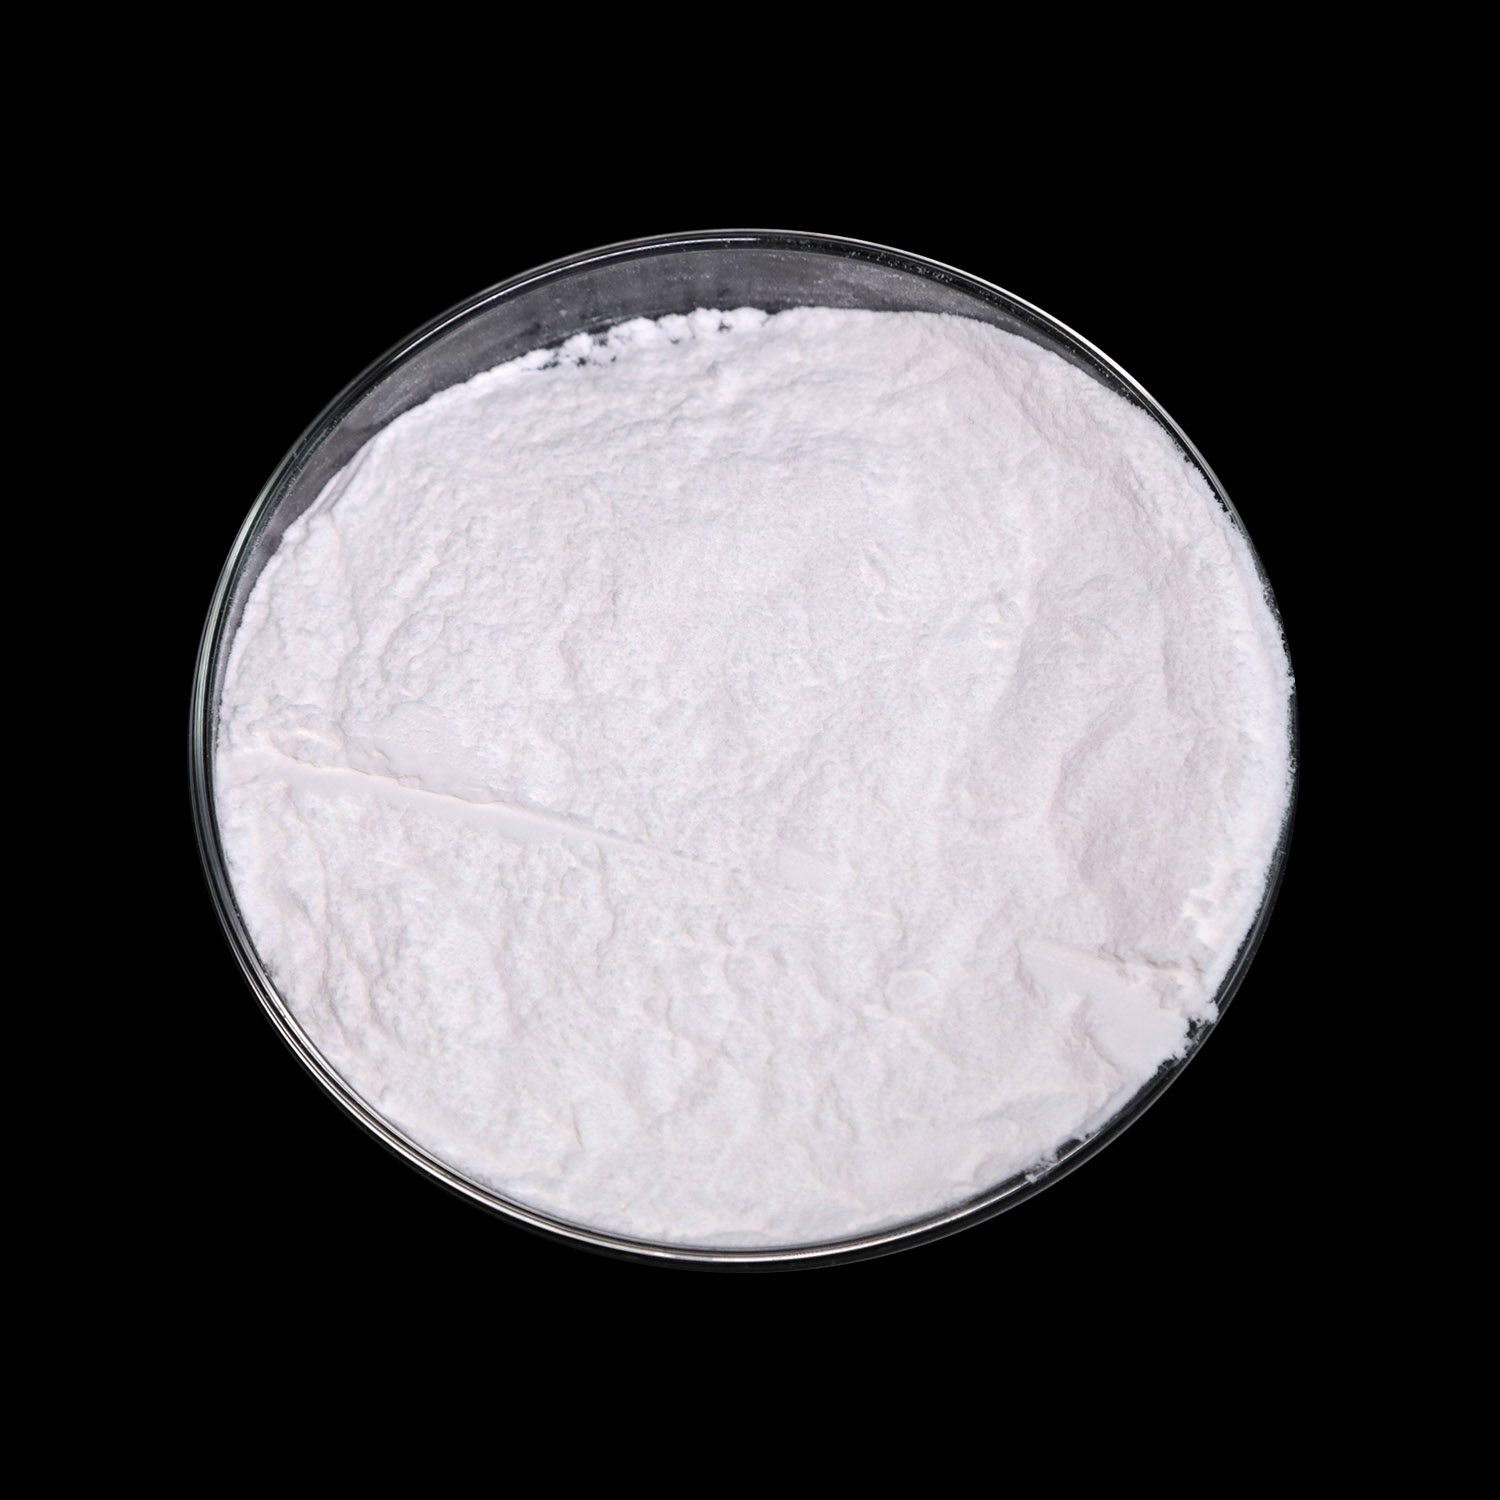 Chinese suppliers 4-oxopiperidinium chloride 41979-39-9 High quality 99% purity 